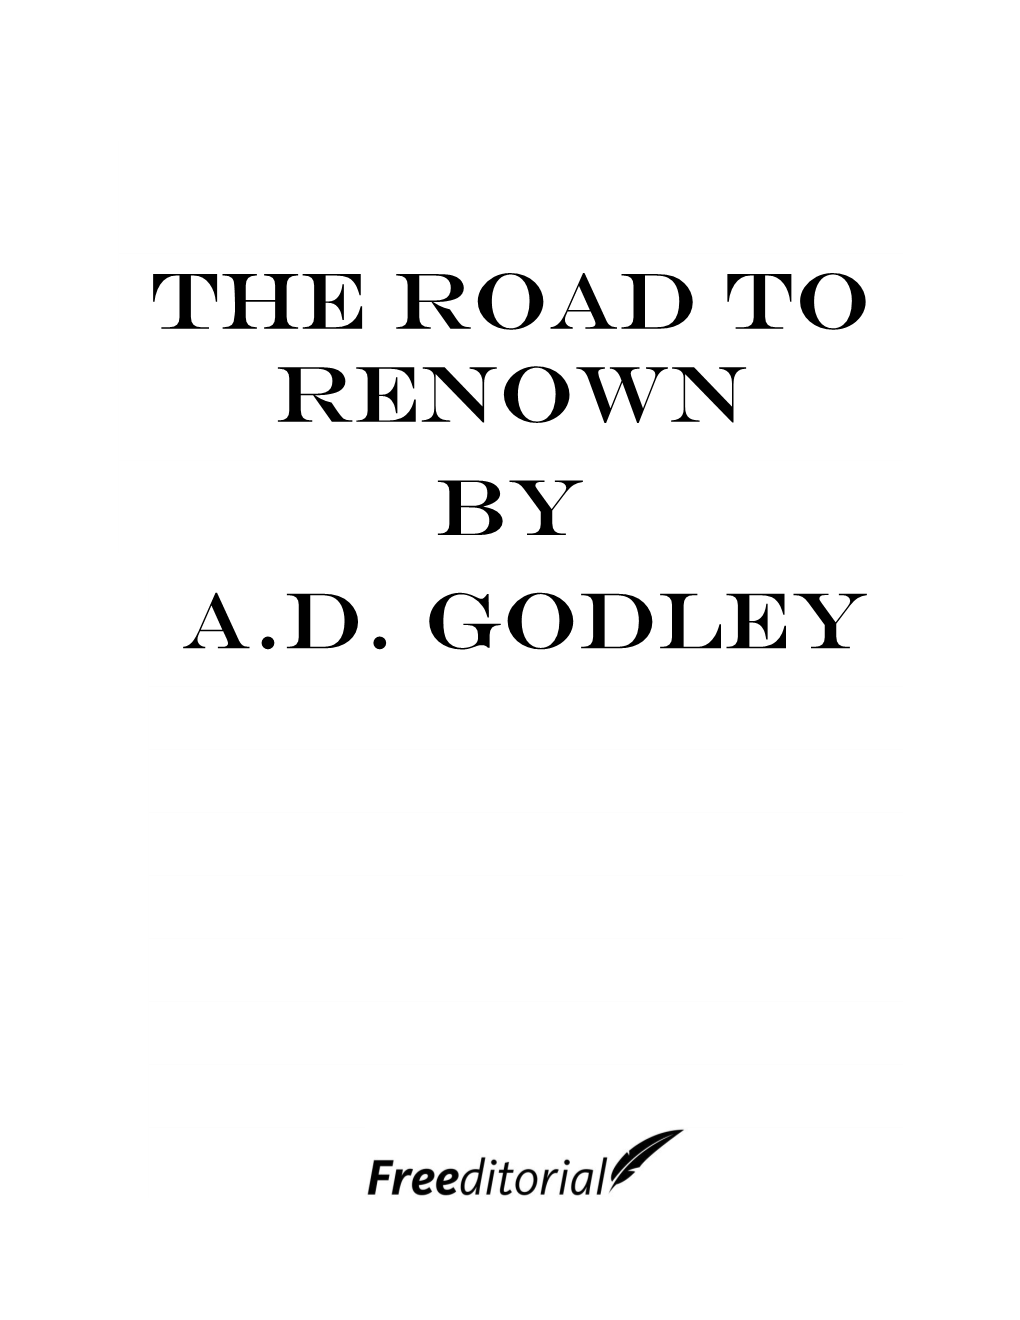 The Road to Renown by A.D. Godley